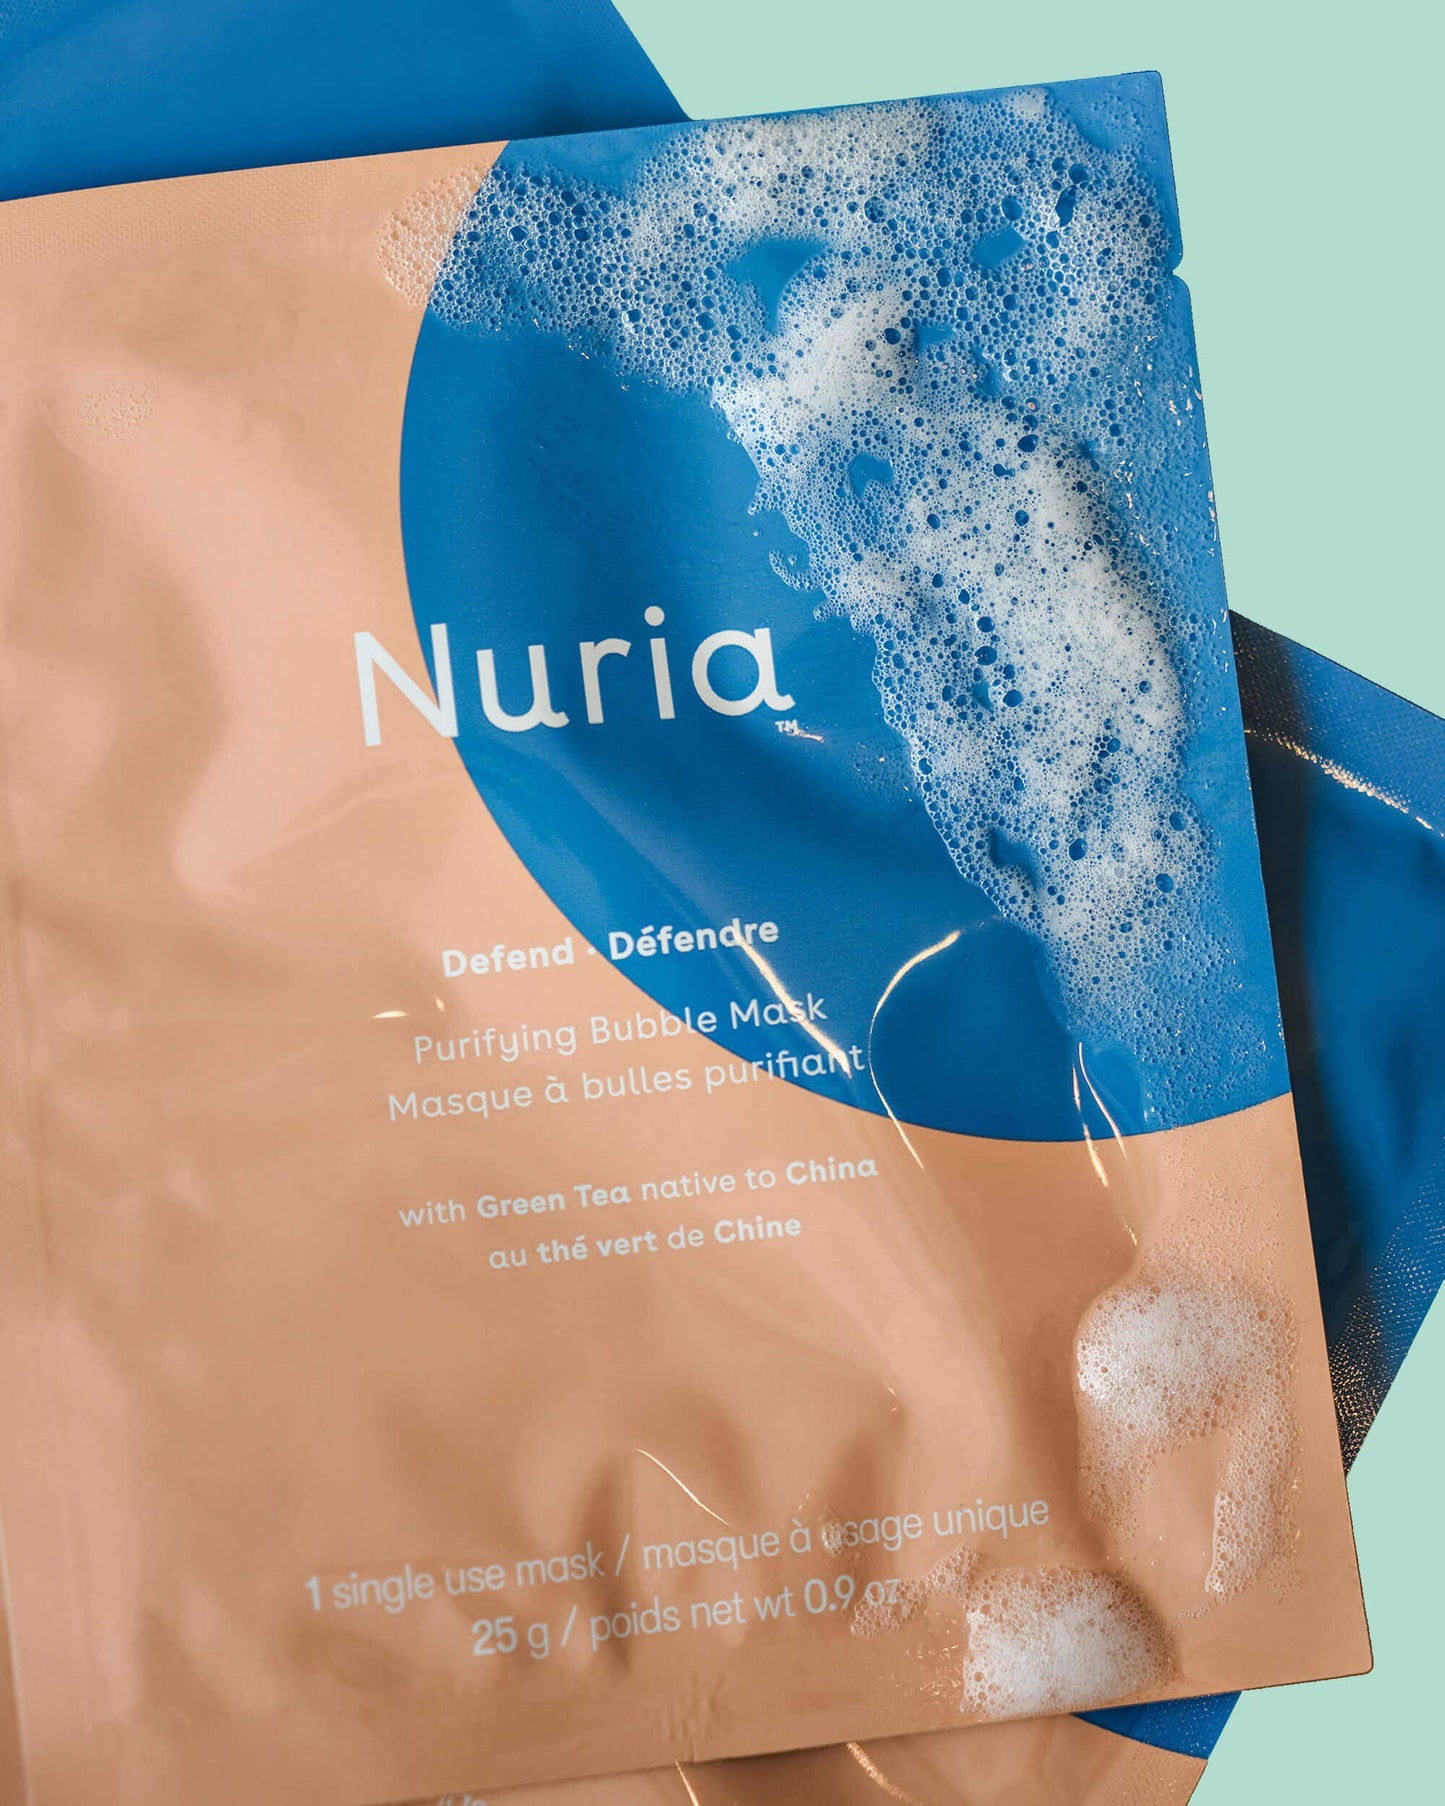 Nuria - Defend Purifying Bubble Mask